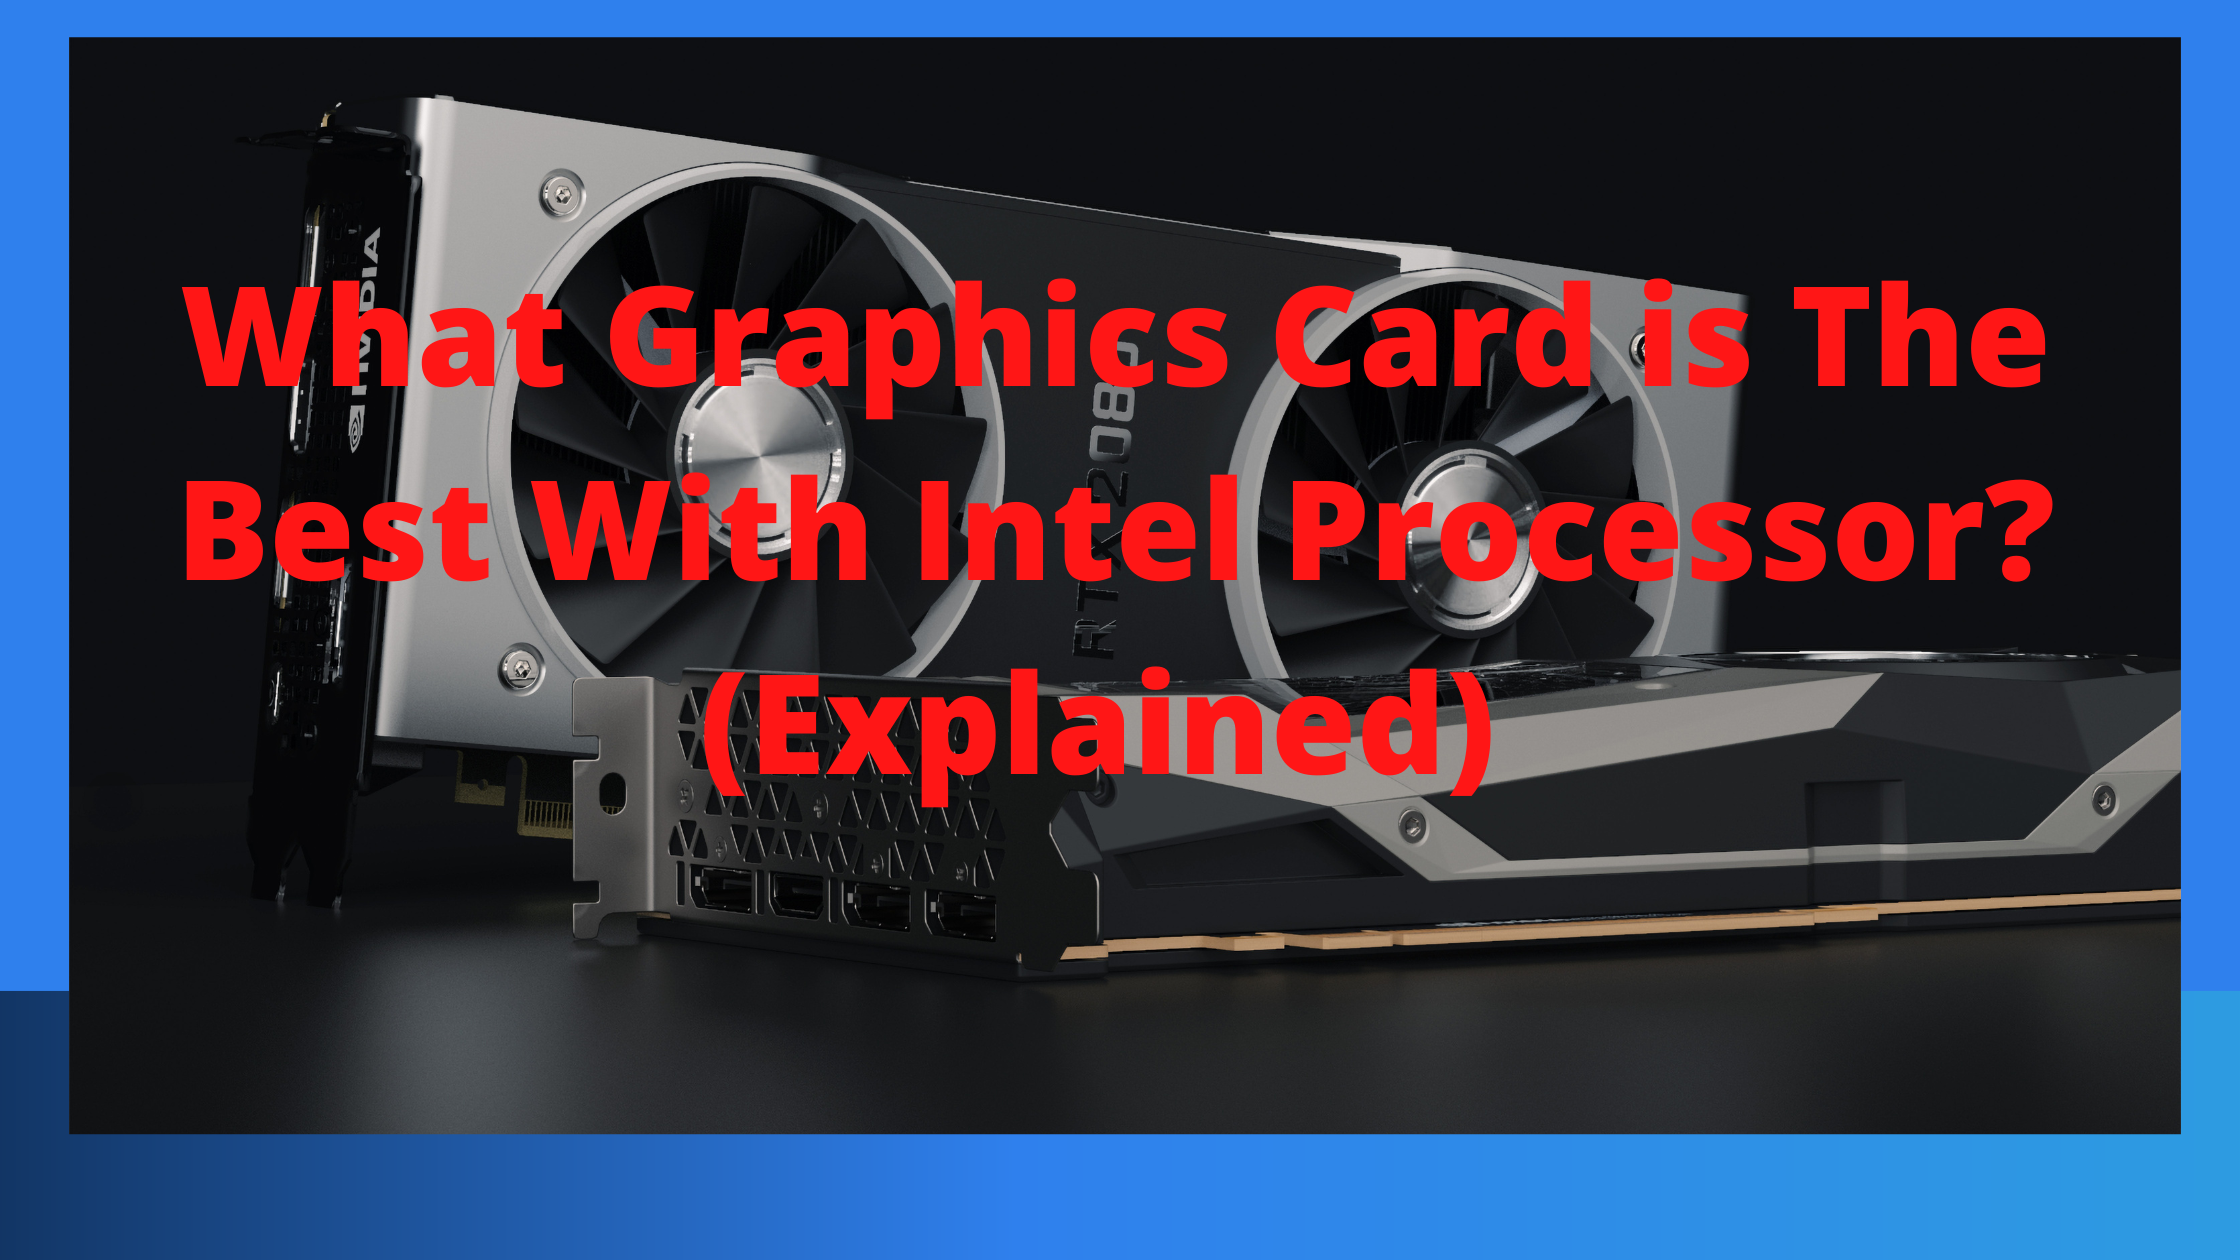 What Graphics Card is The Best With Intel Processor? (Explained)